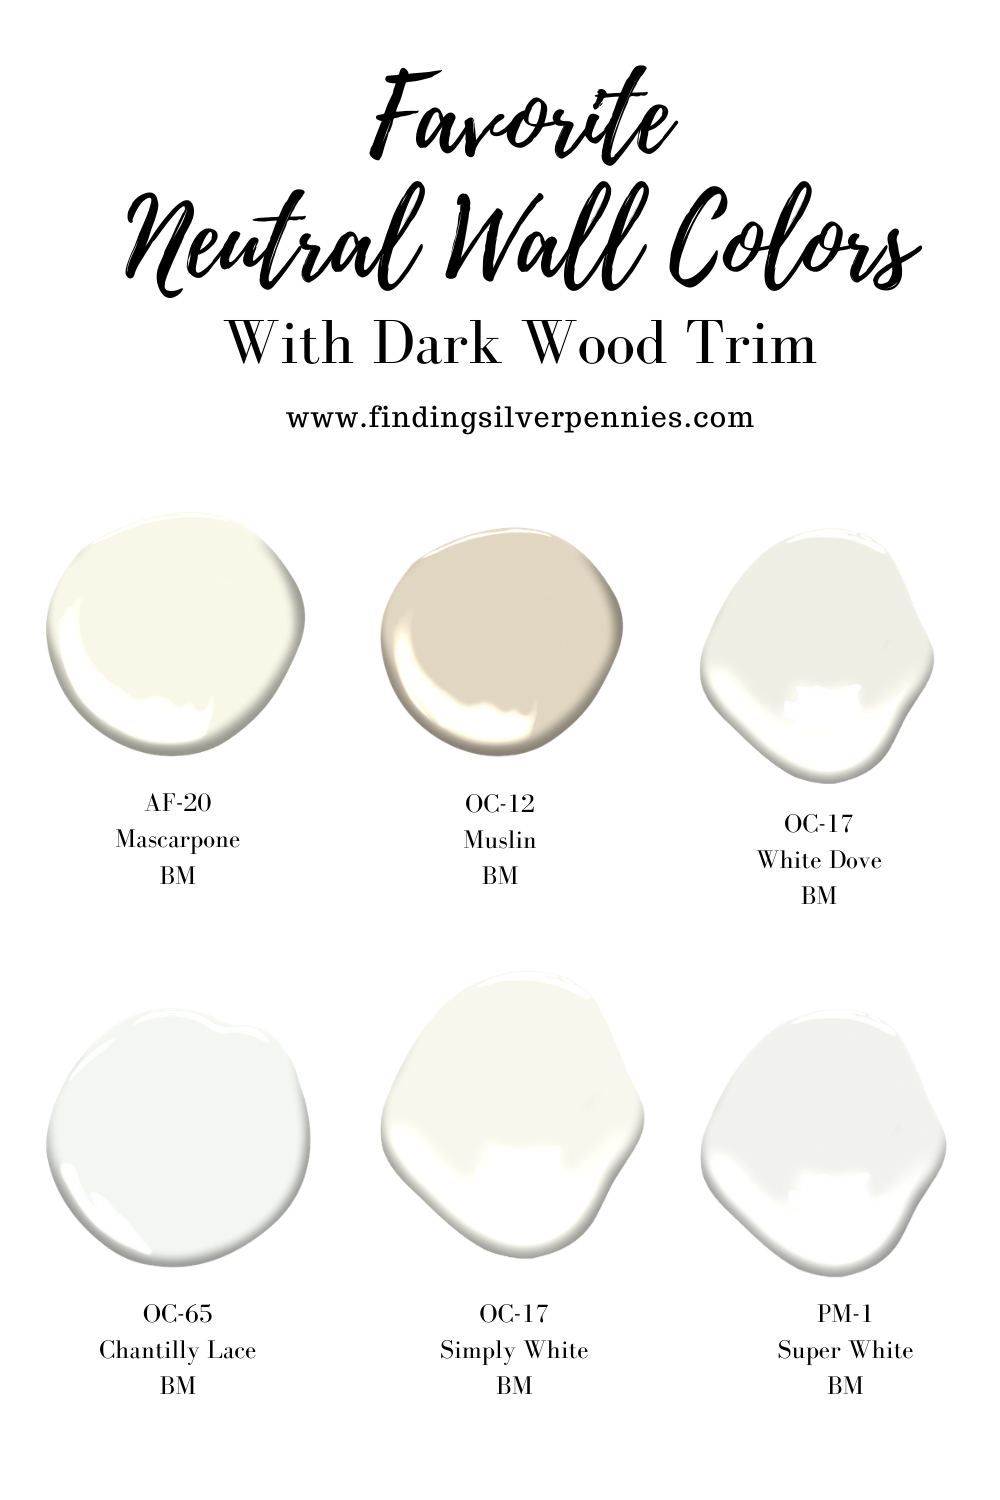 Wood paint is easy to choose if you know this.